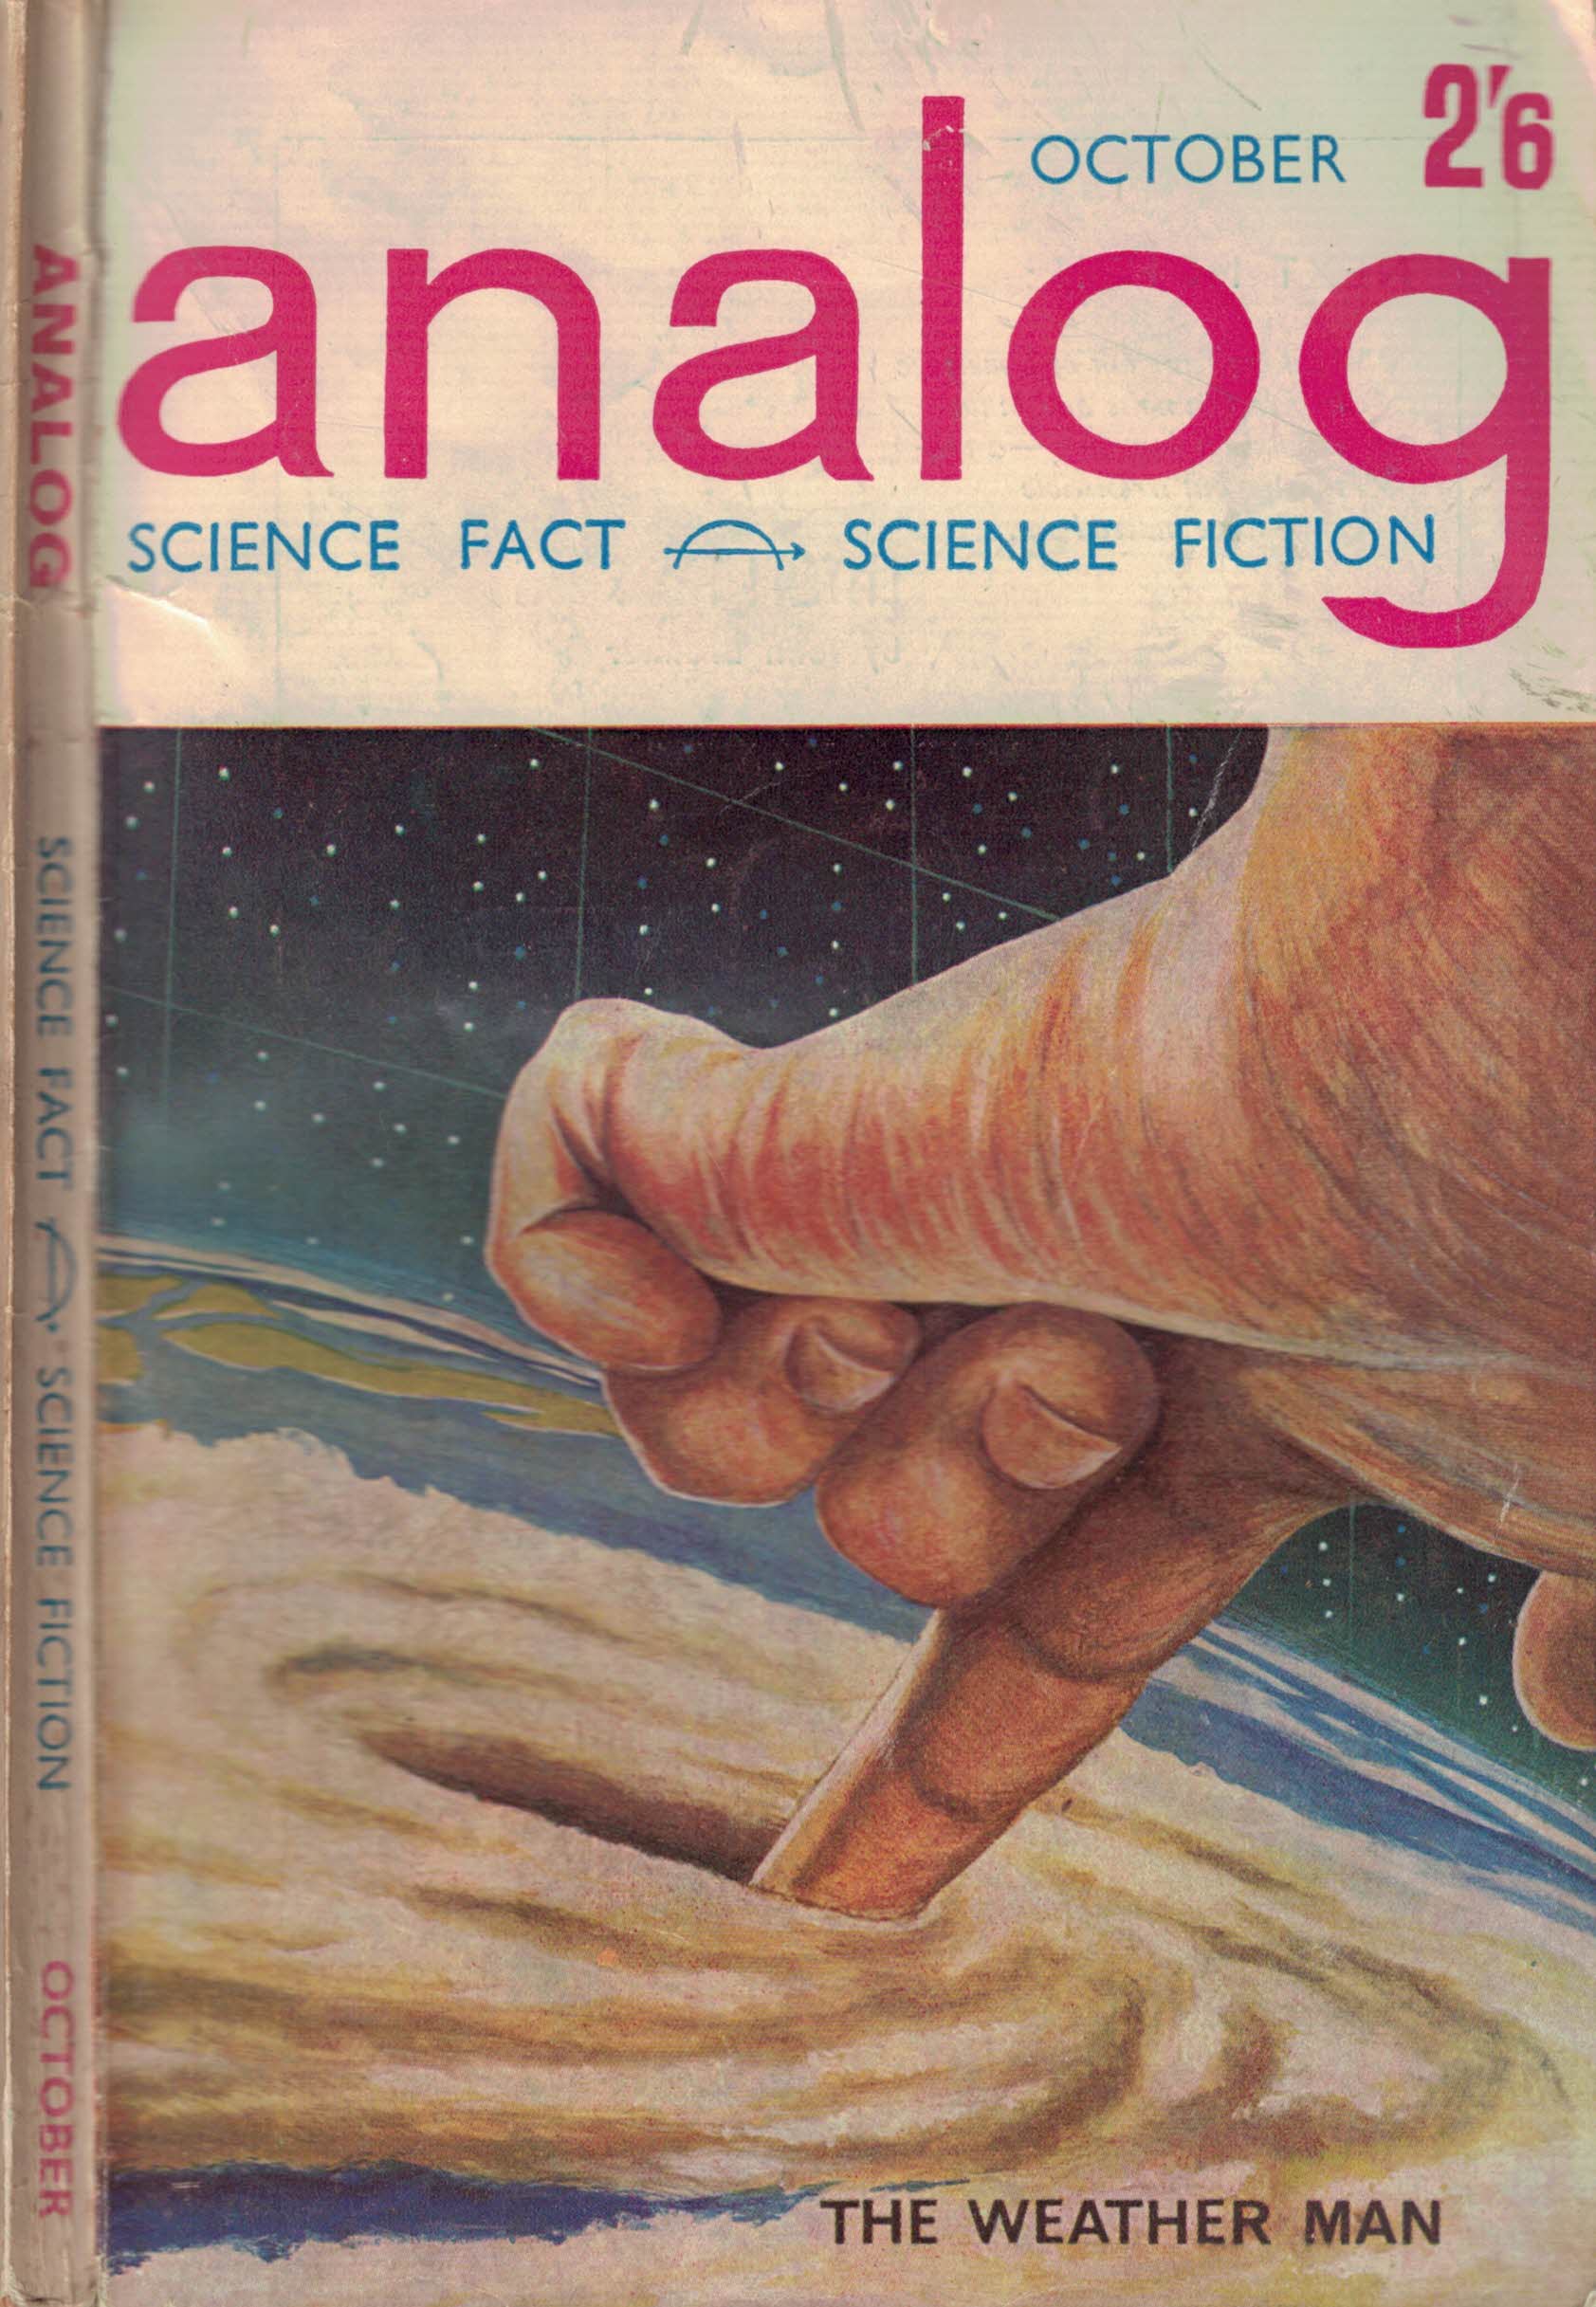 Analog. Science Fiction and Fact. Volume 18, Number 10. October 1962. British edition.